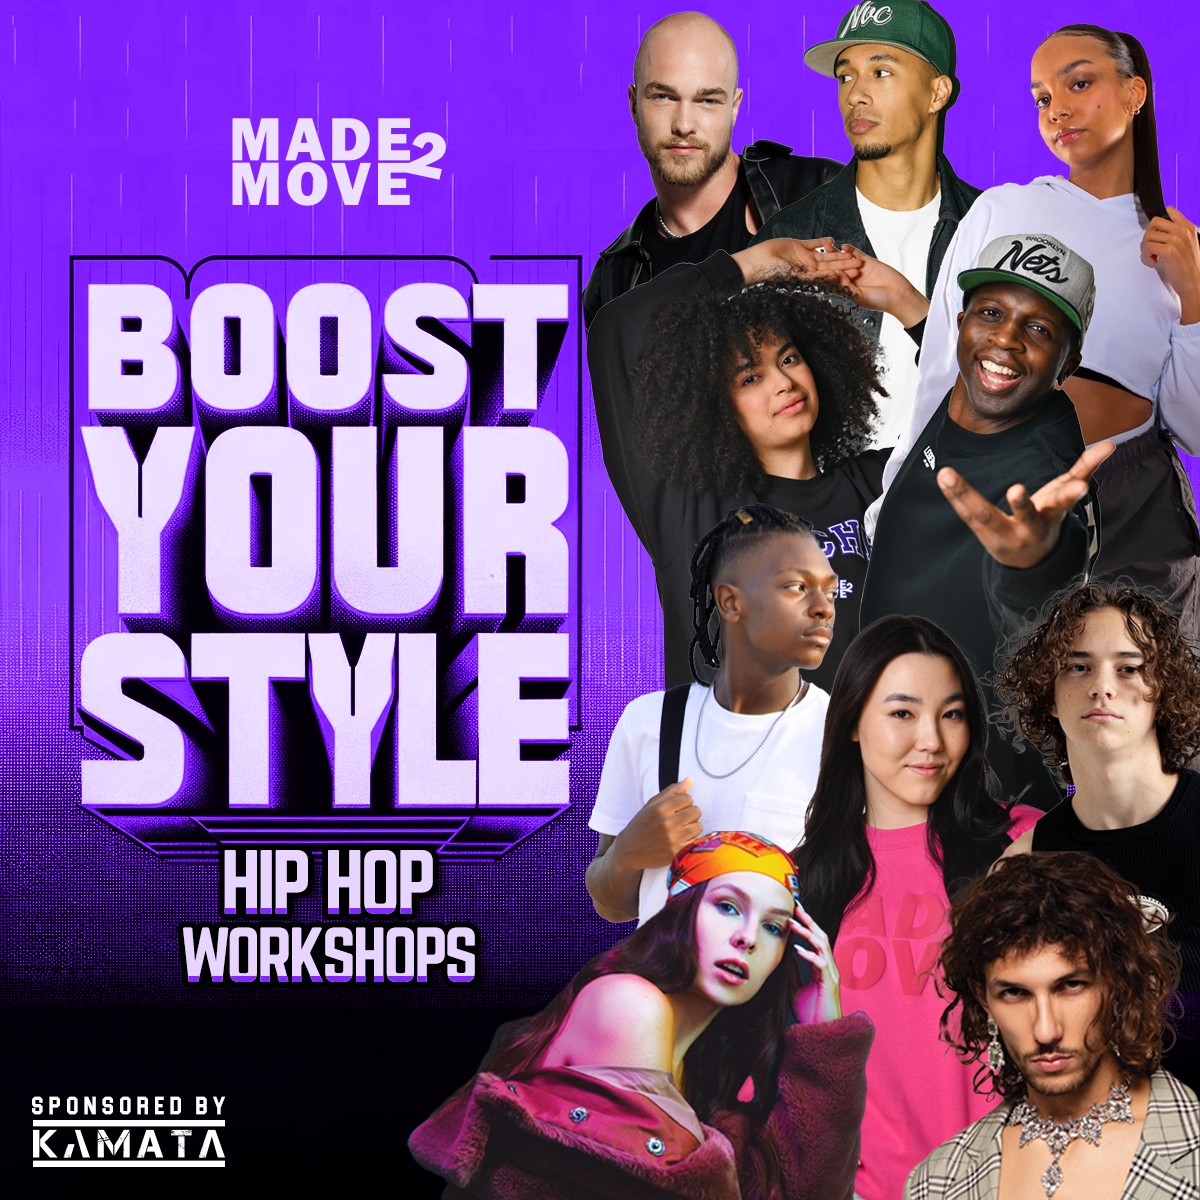 Boost Your Style Hip Hop workshops